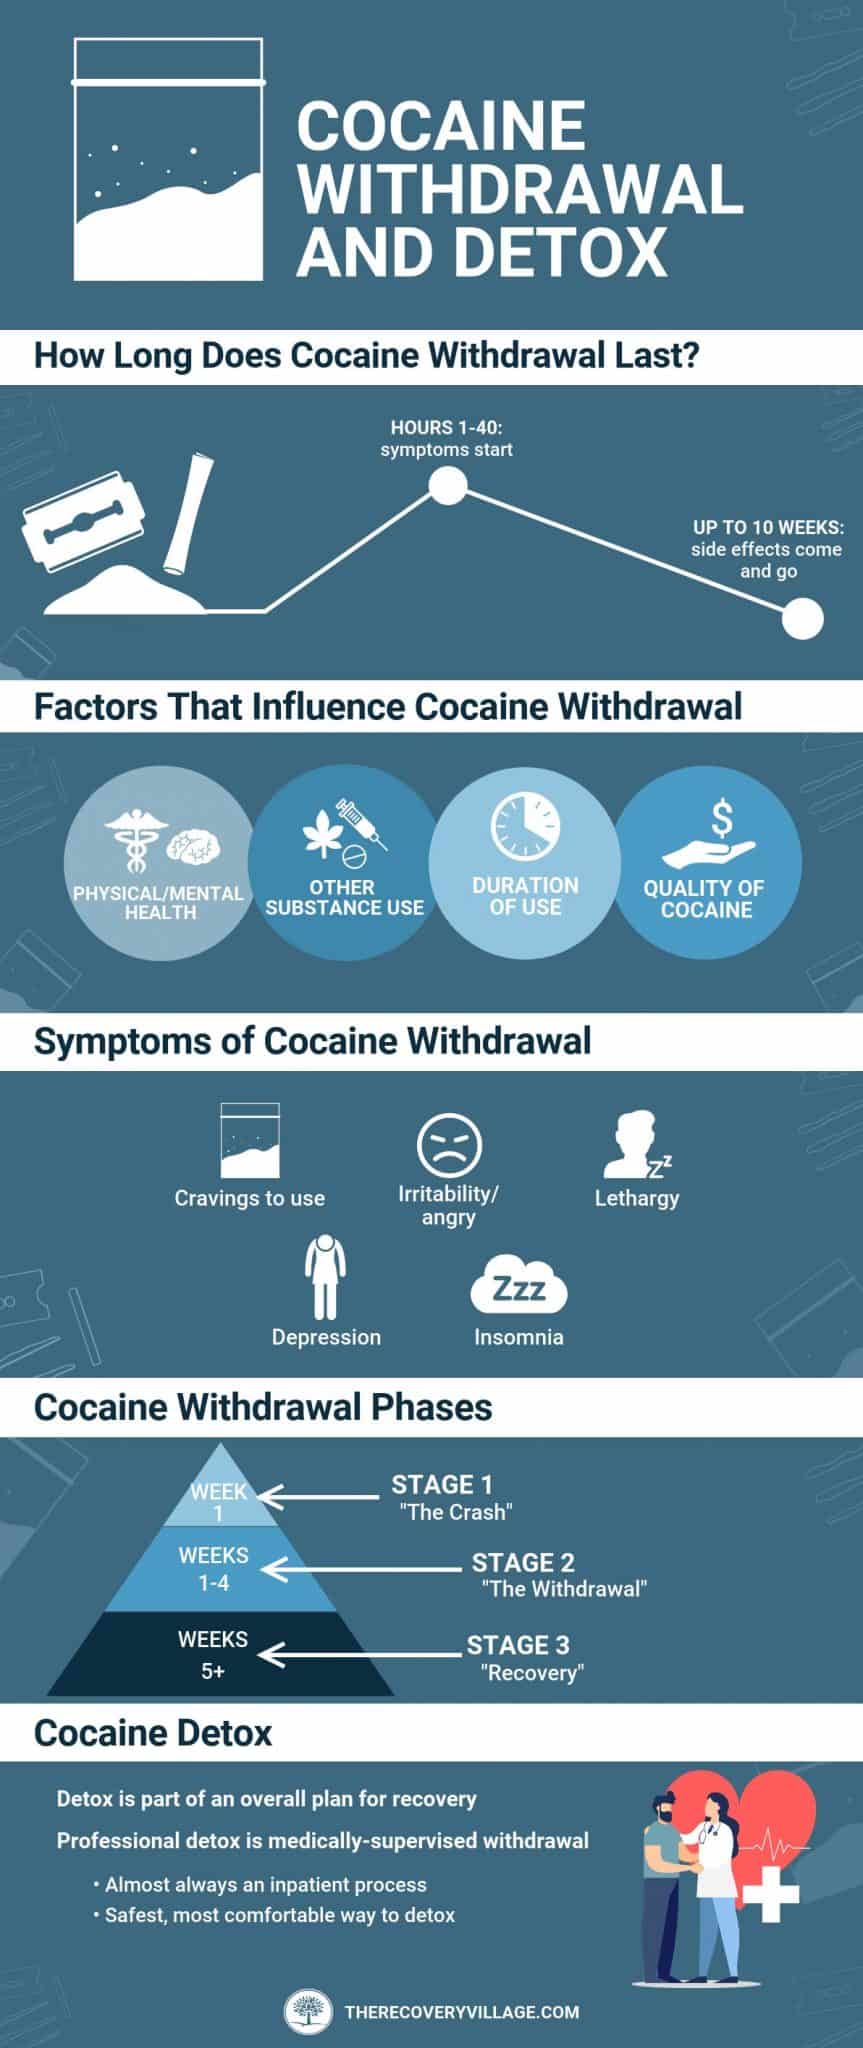 What Is An 8 Ball Of Cocaine? - Addiction Resource